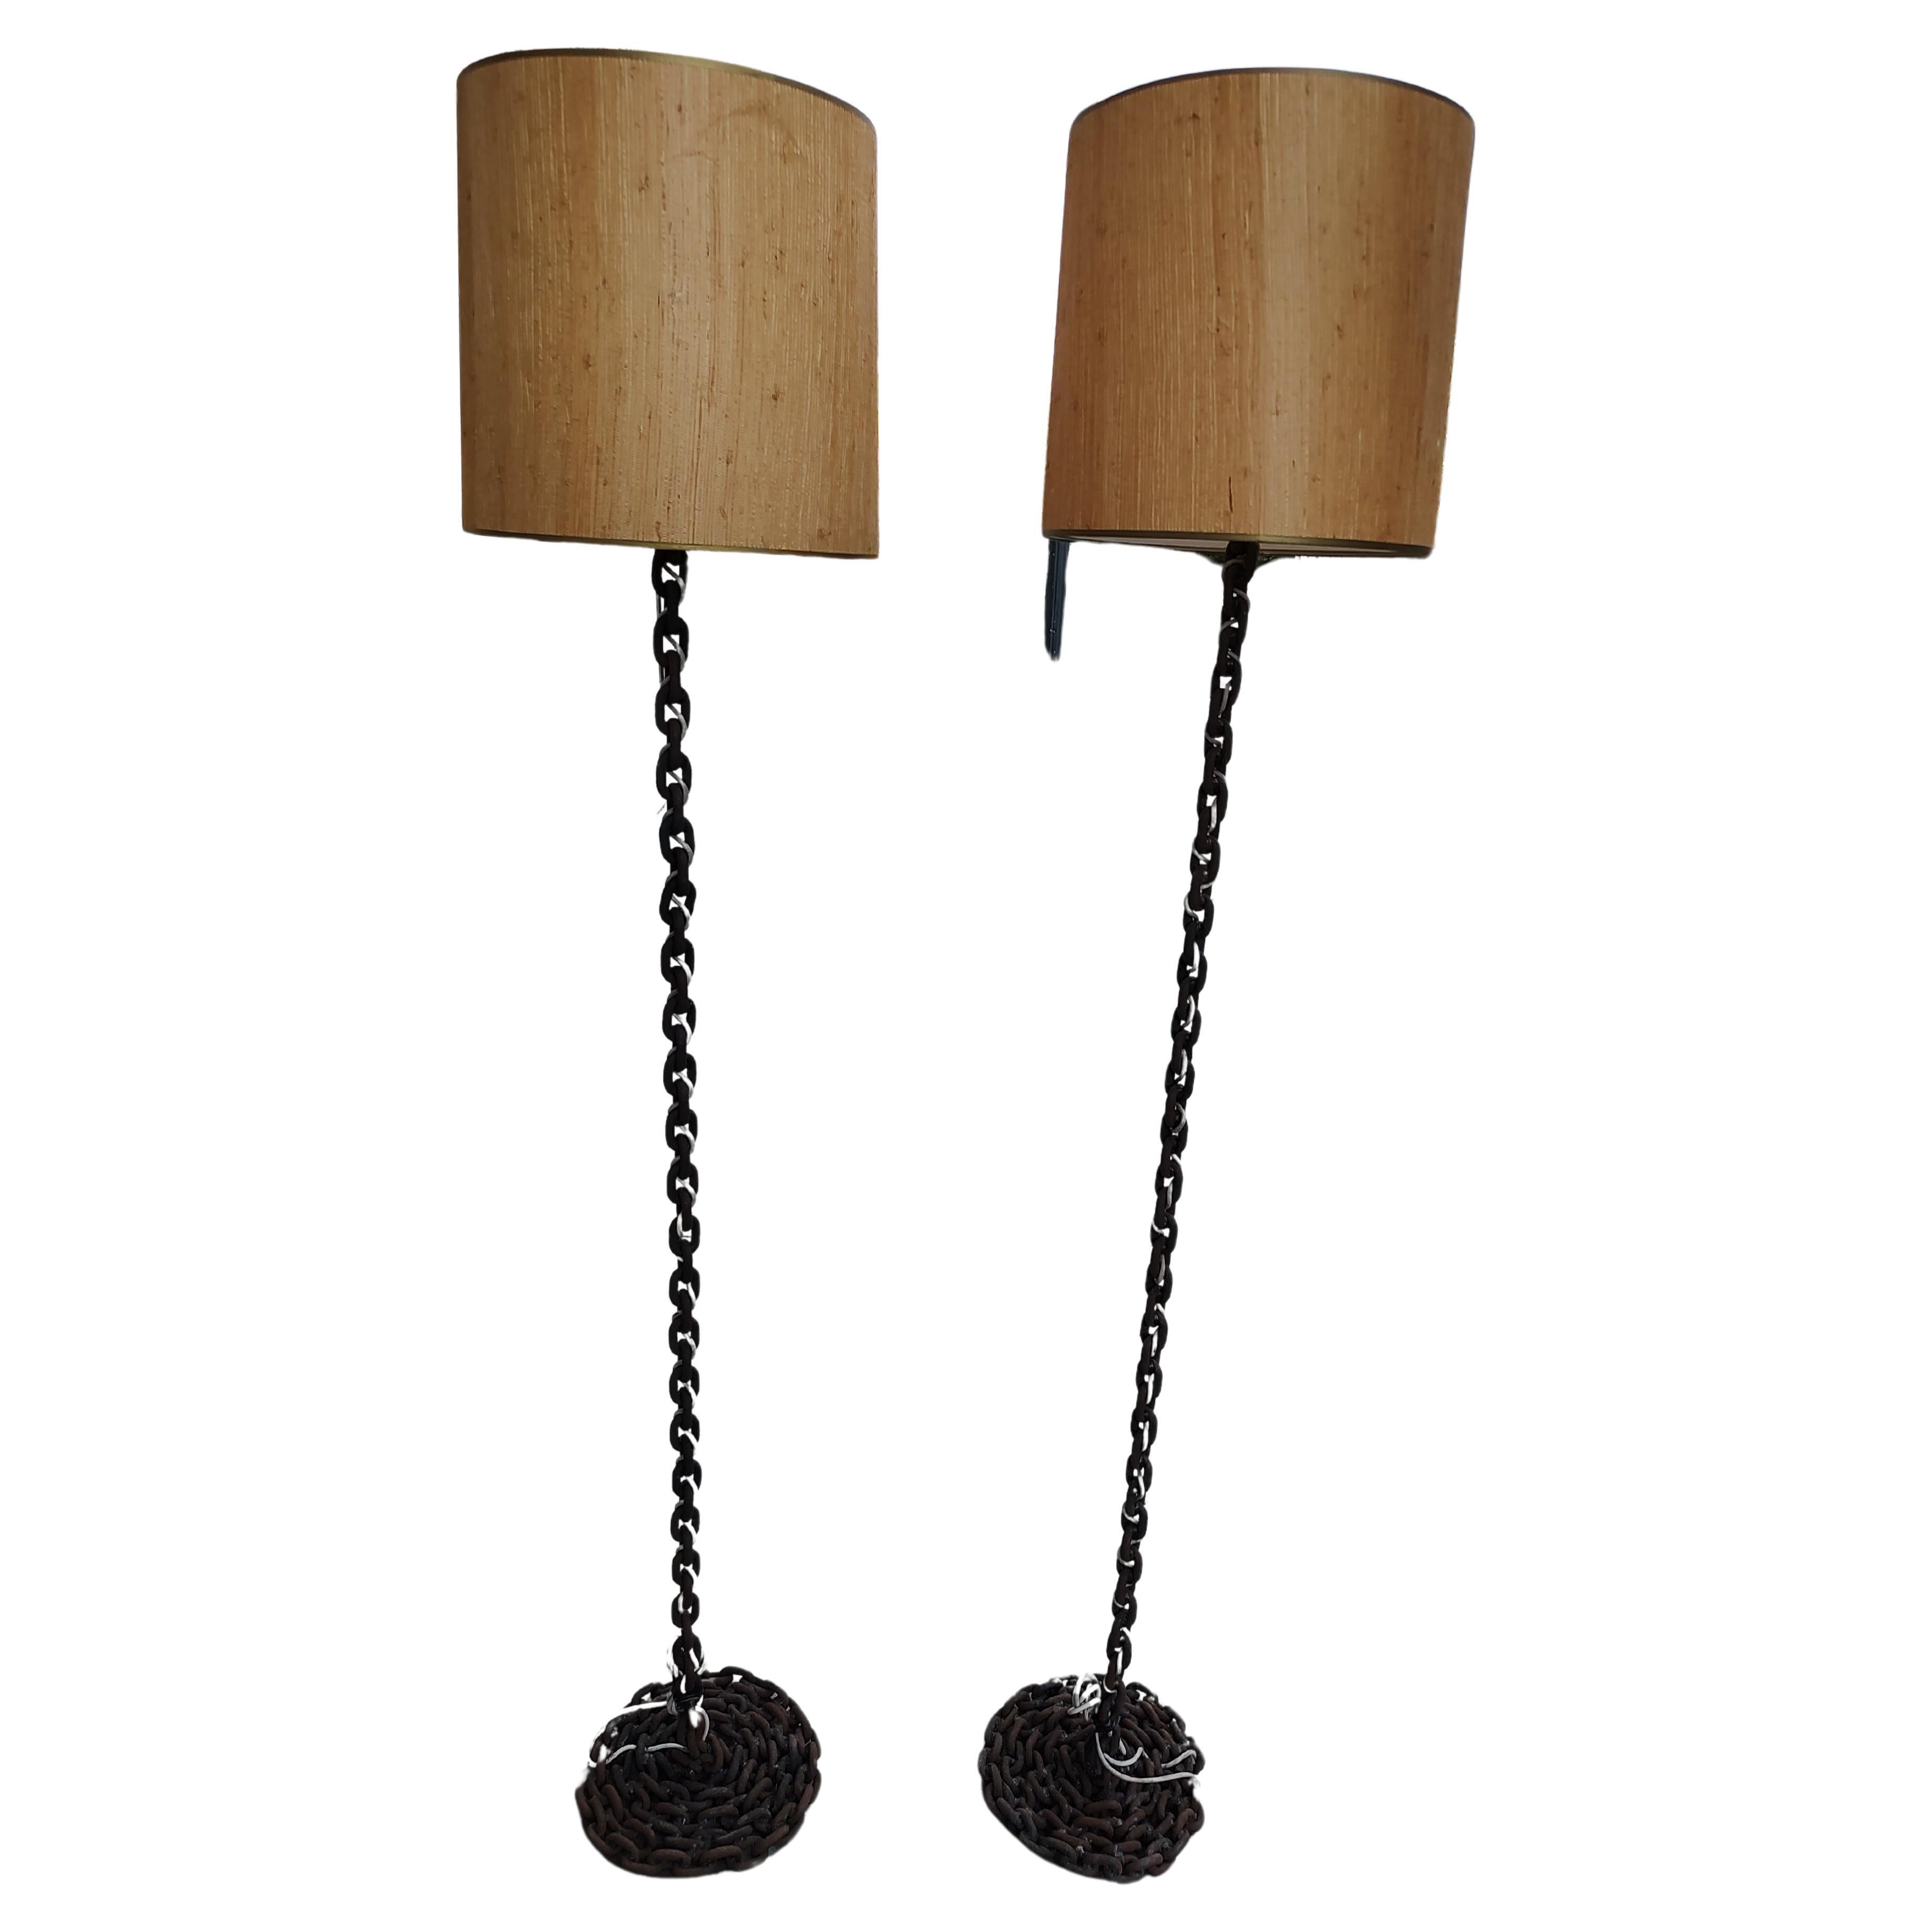 Pair of Mid-Century Modern Sculptural Brutalist Chain Rope Floor Lamps In Good Condition For Sale In Port Jervis, NY